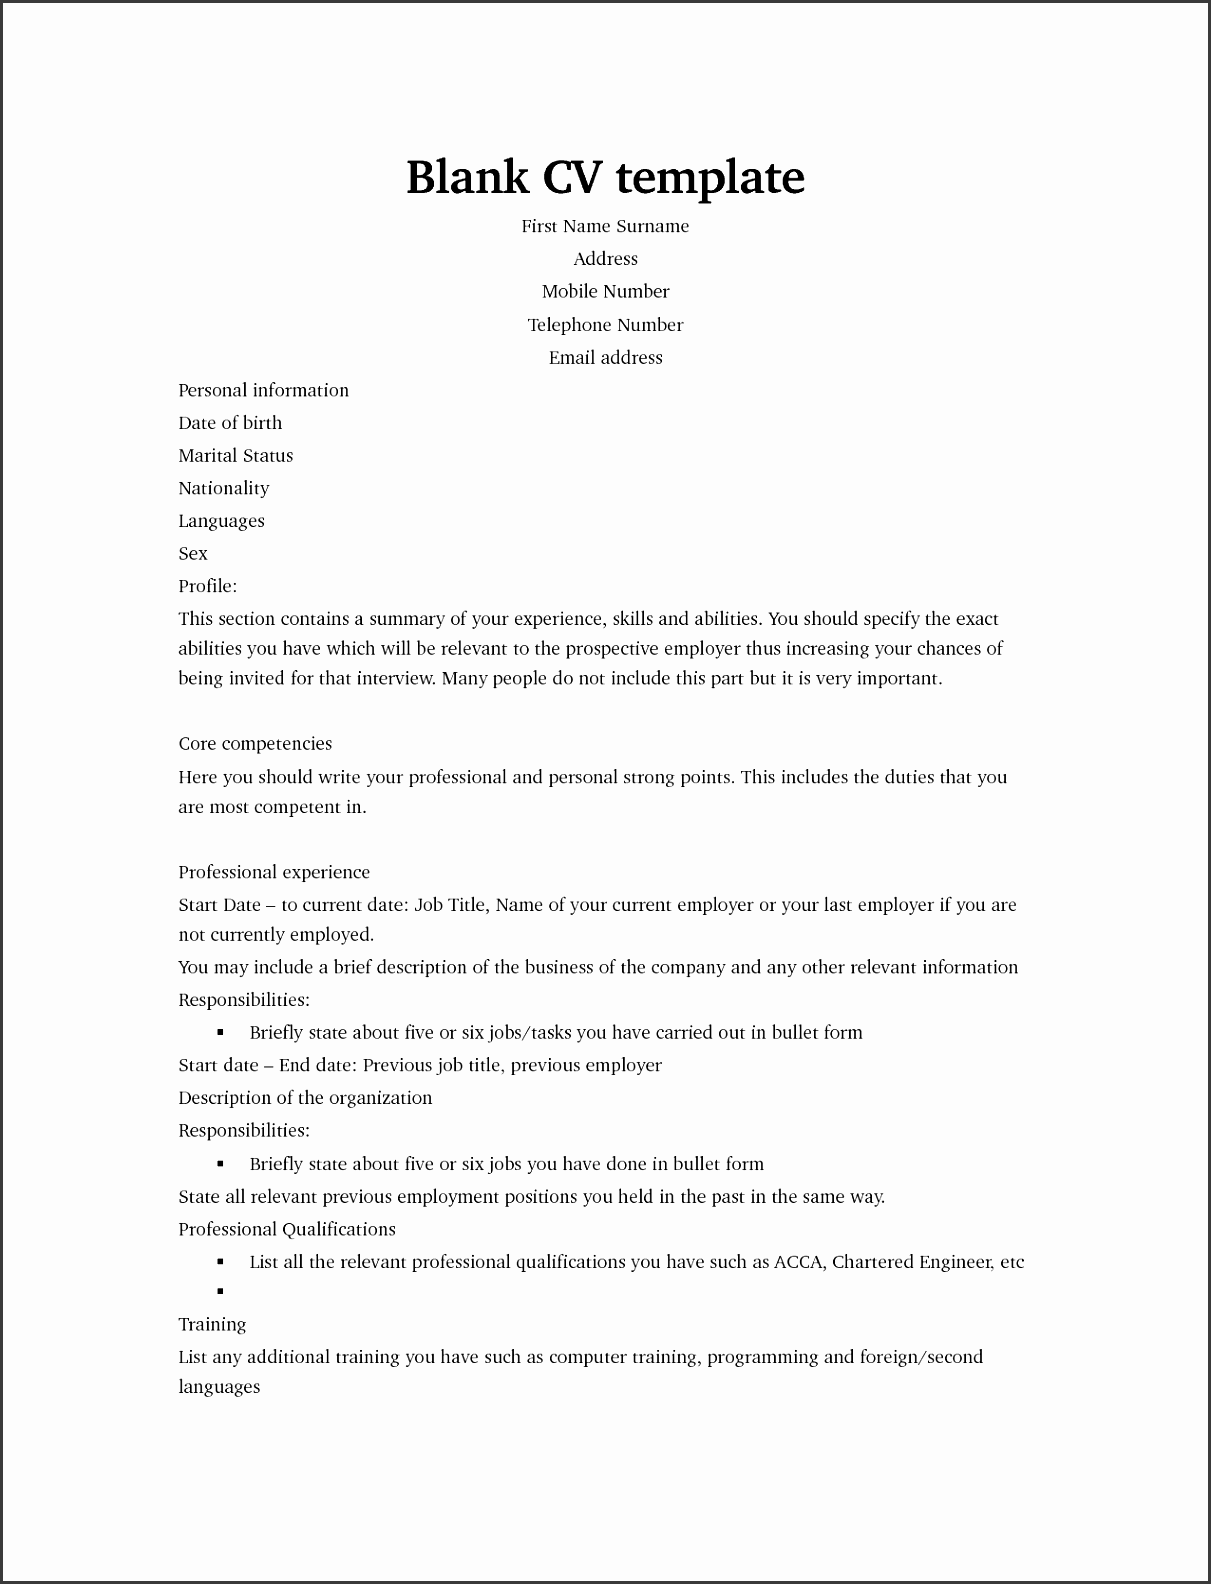 empty resume format 18 example blank cv template builder free blank resume examples